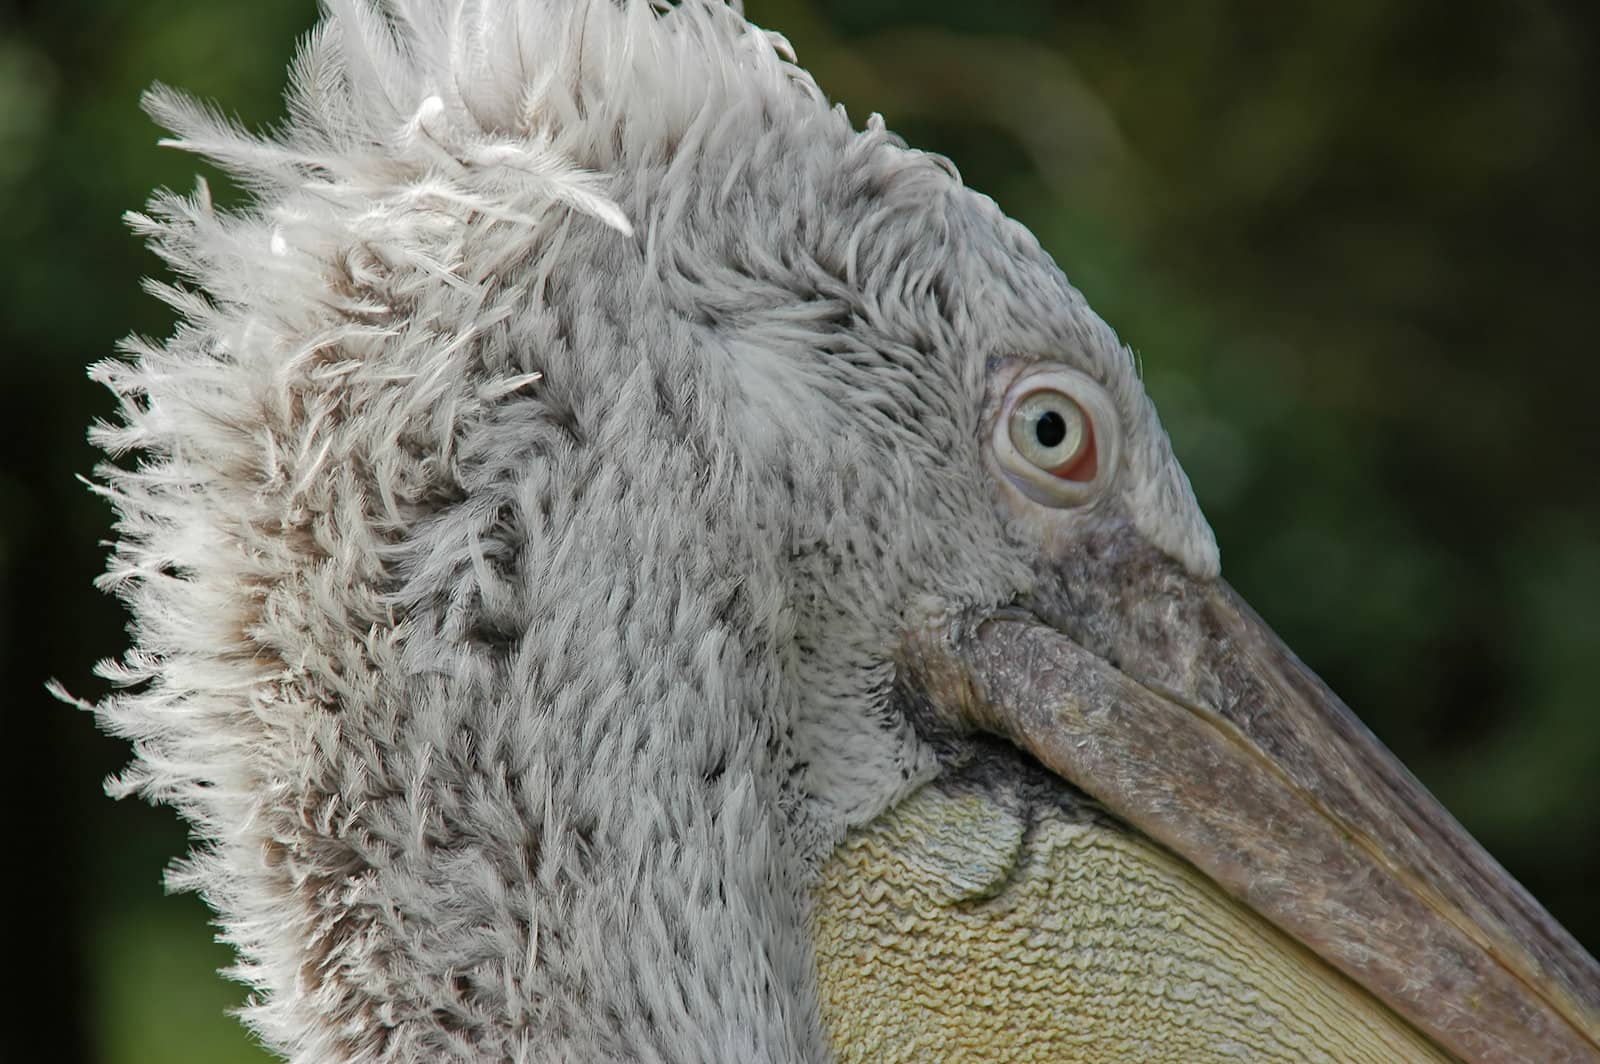 Pelican Close-Up showing detail of eye and bill by raalves